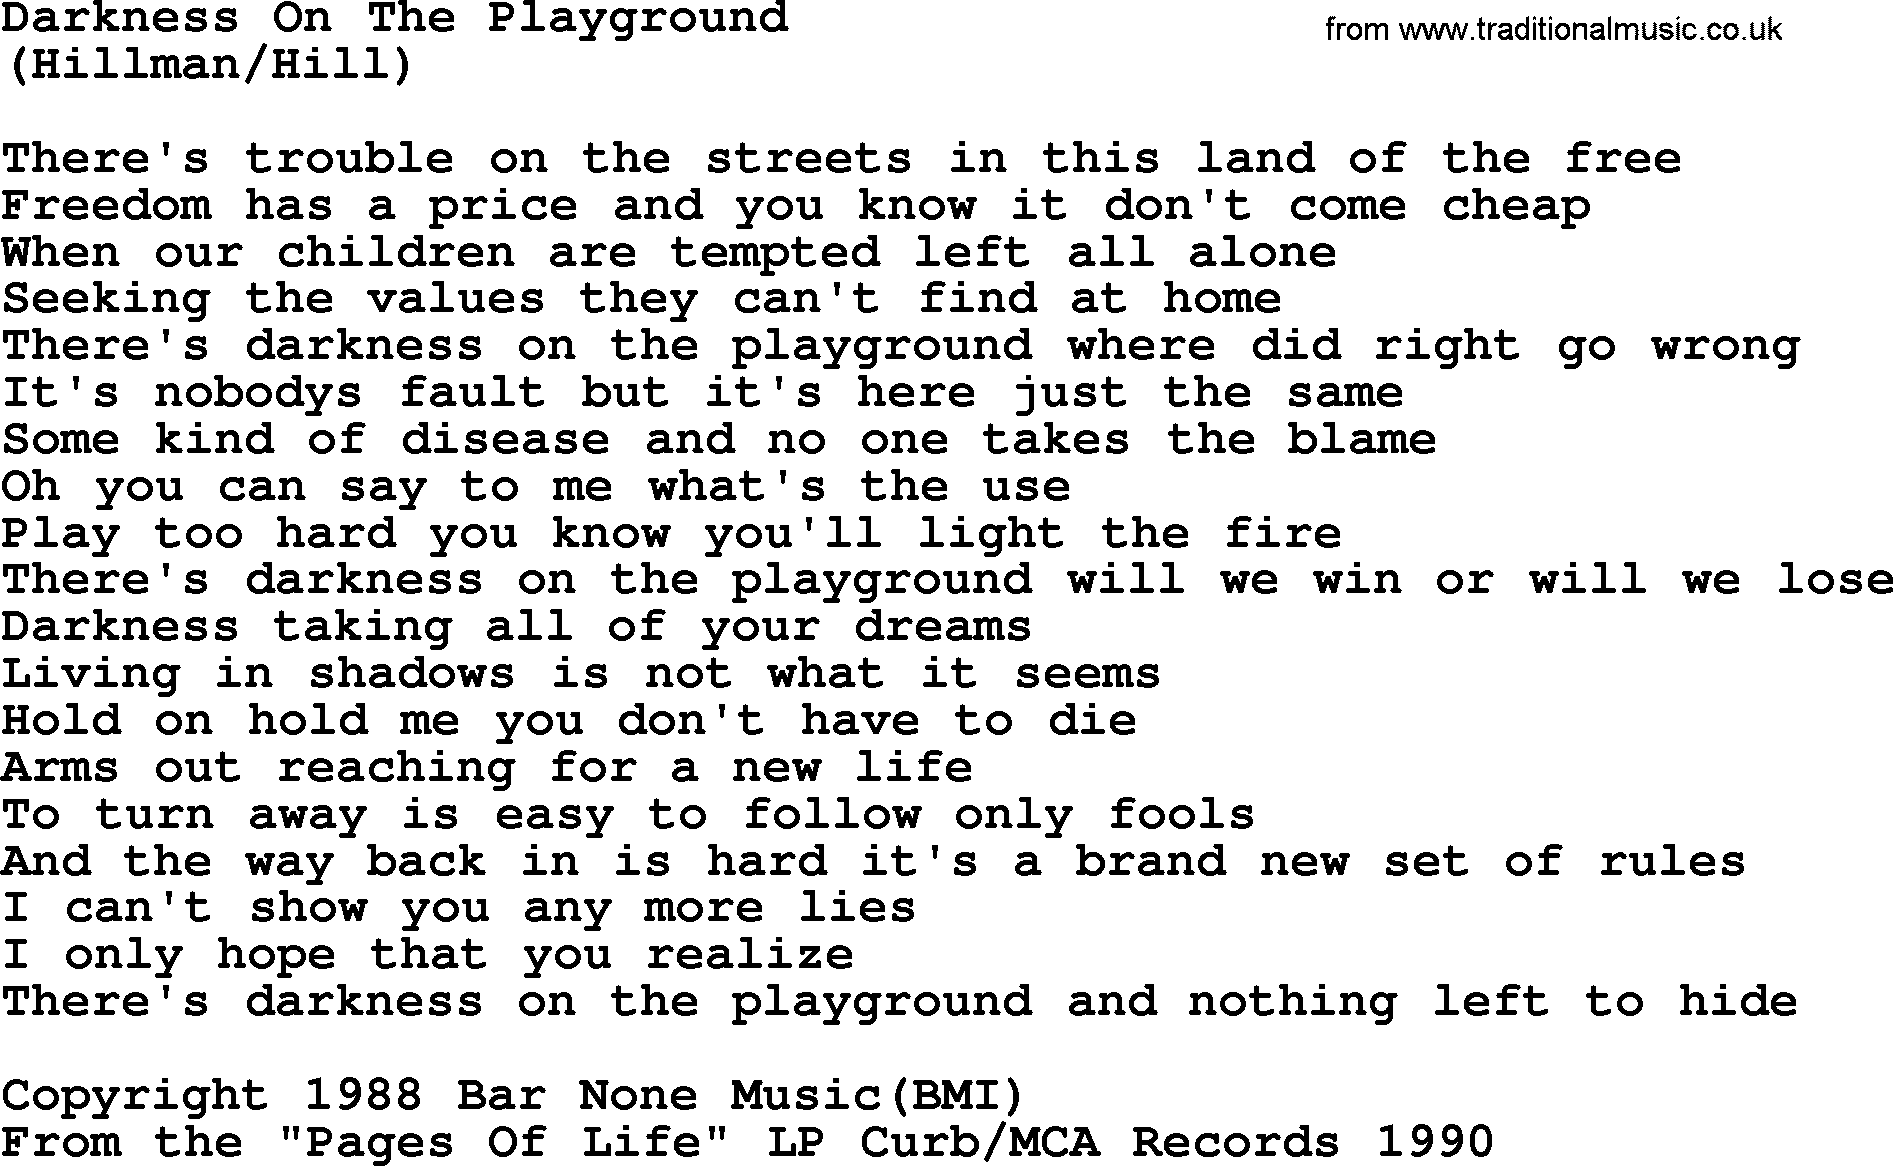 The Byrds song Darkness On The Playground, lyrics